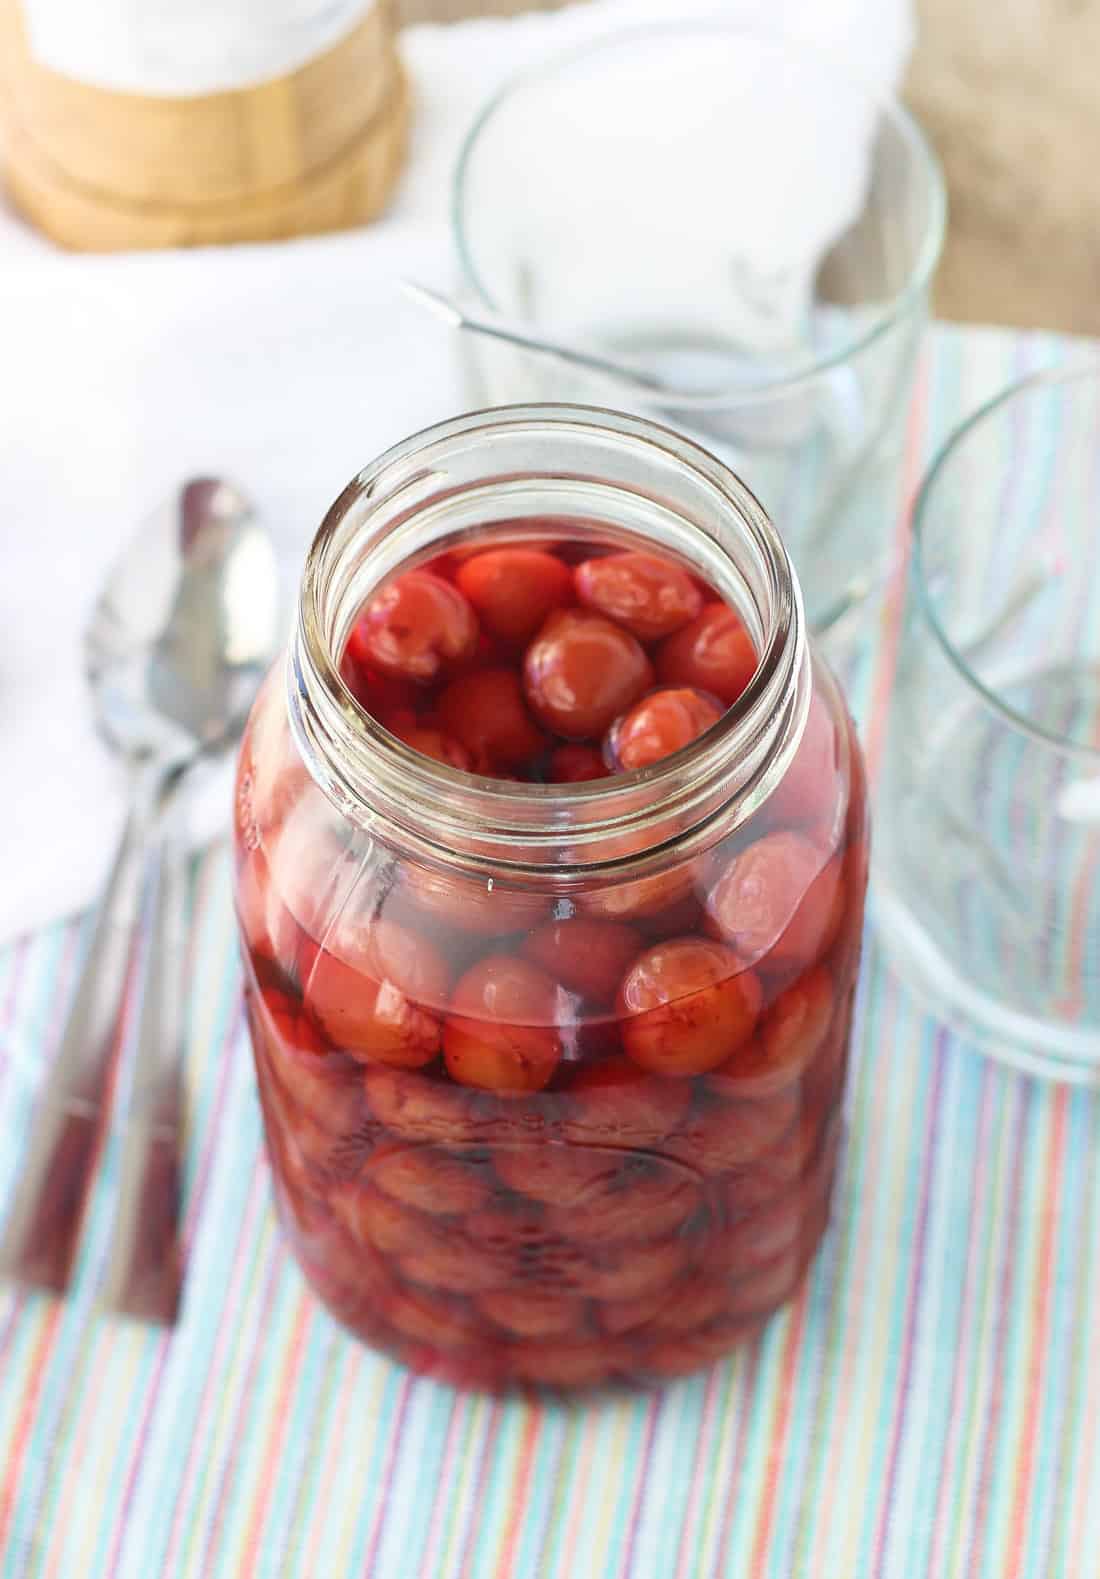 A large glass jar filled with whole cherries and maraschino liquid.